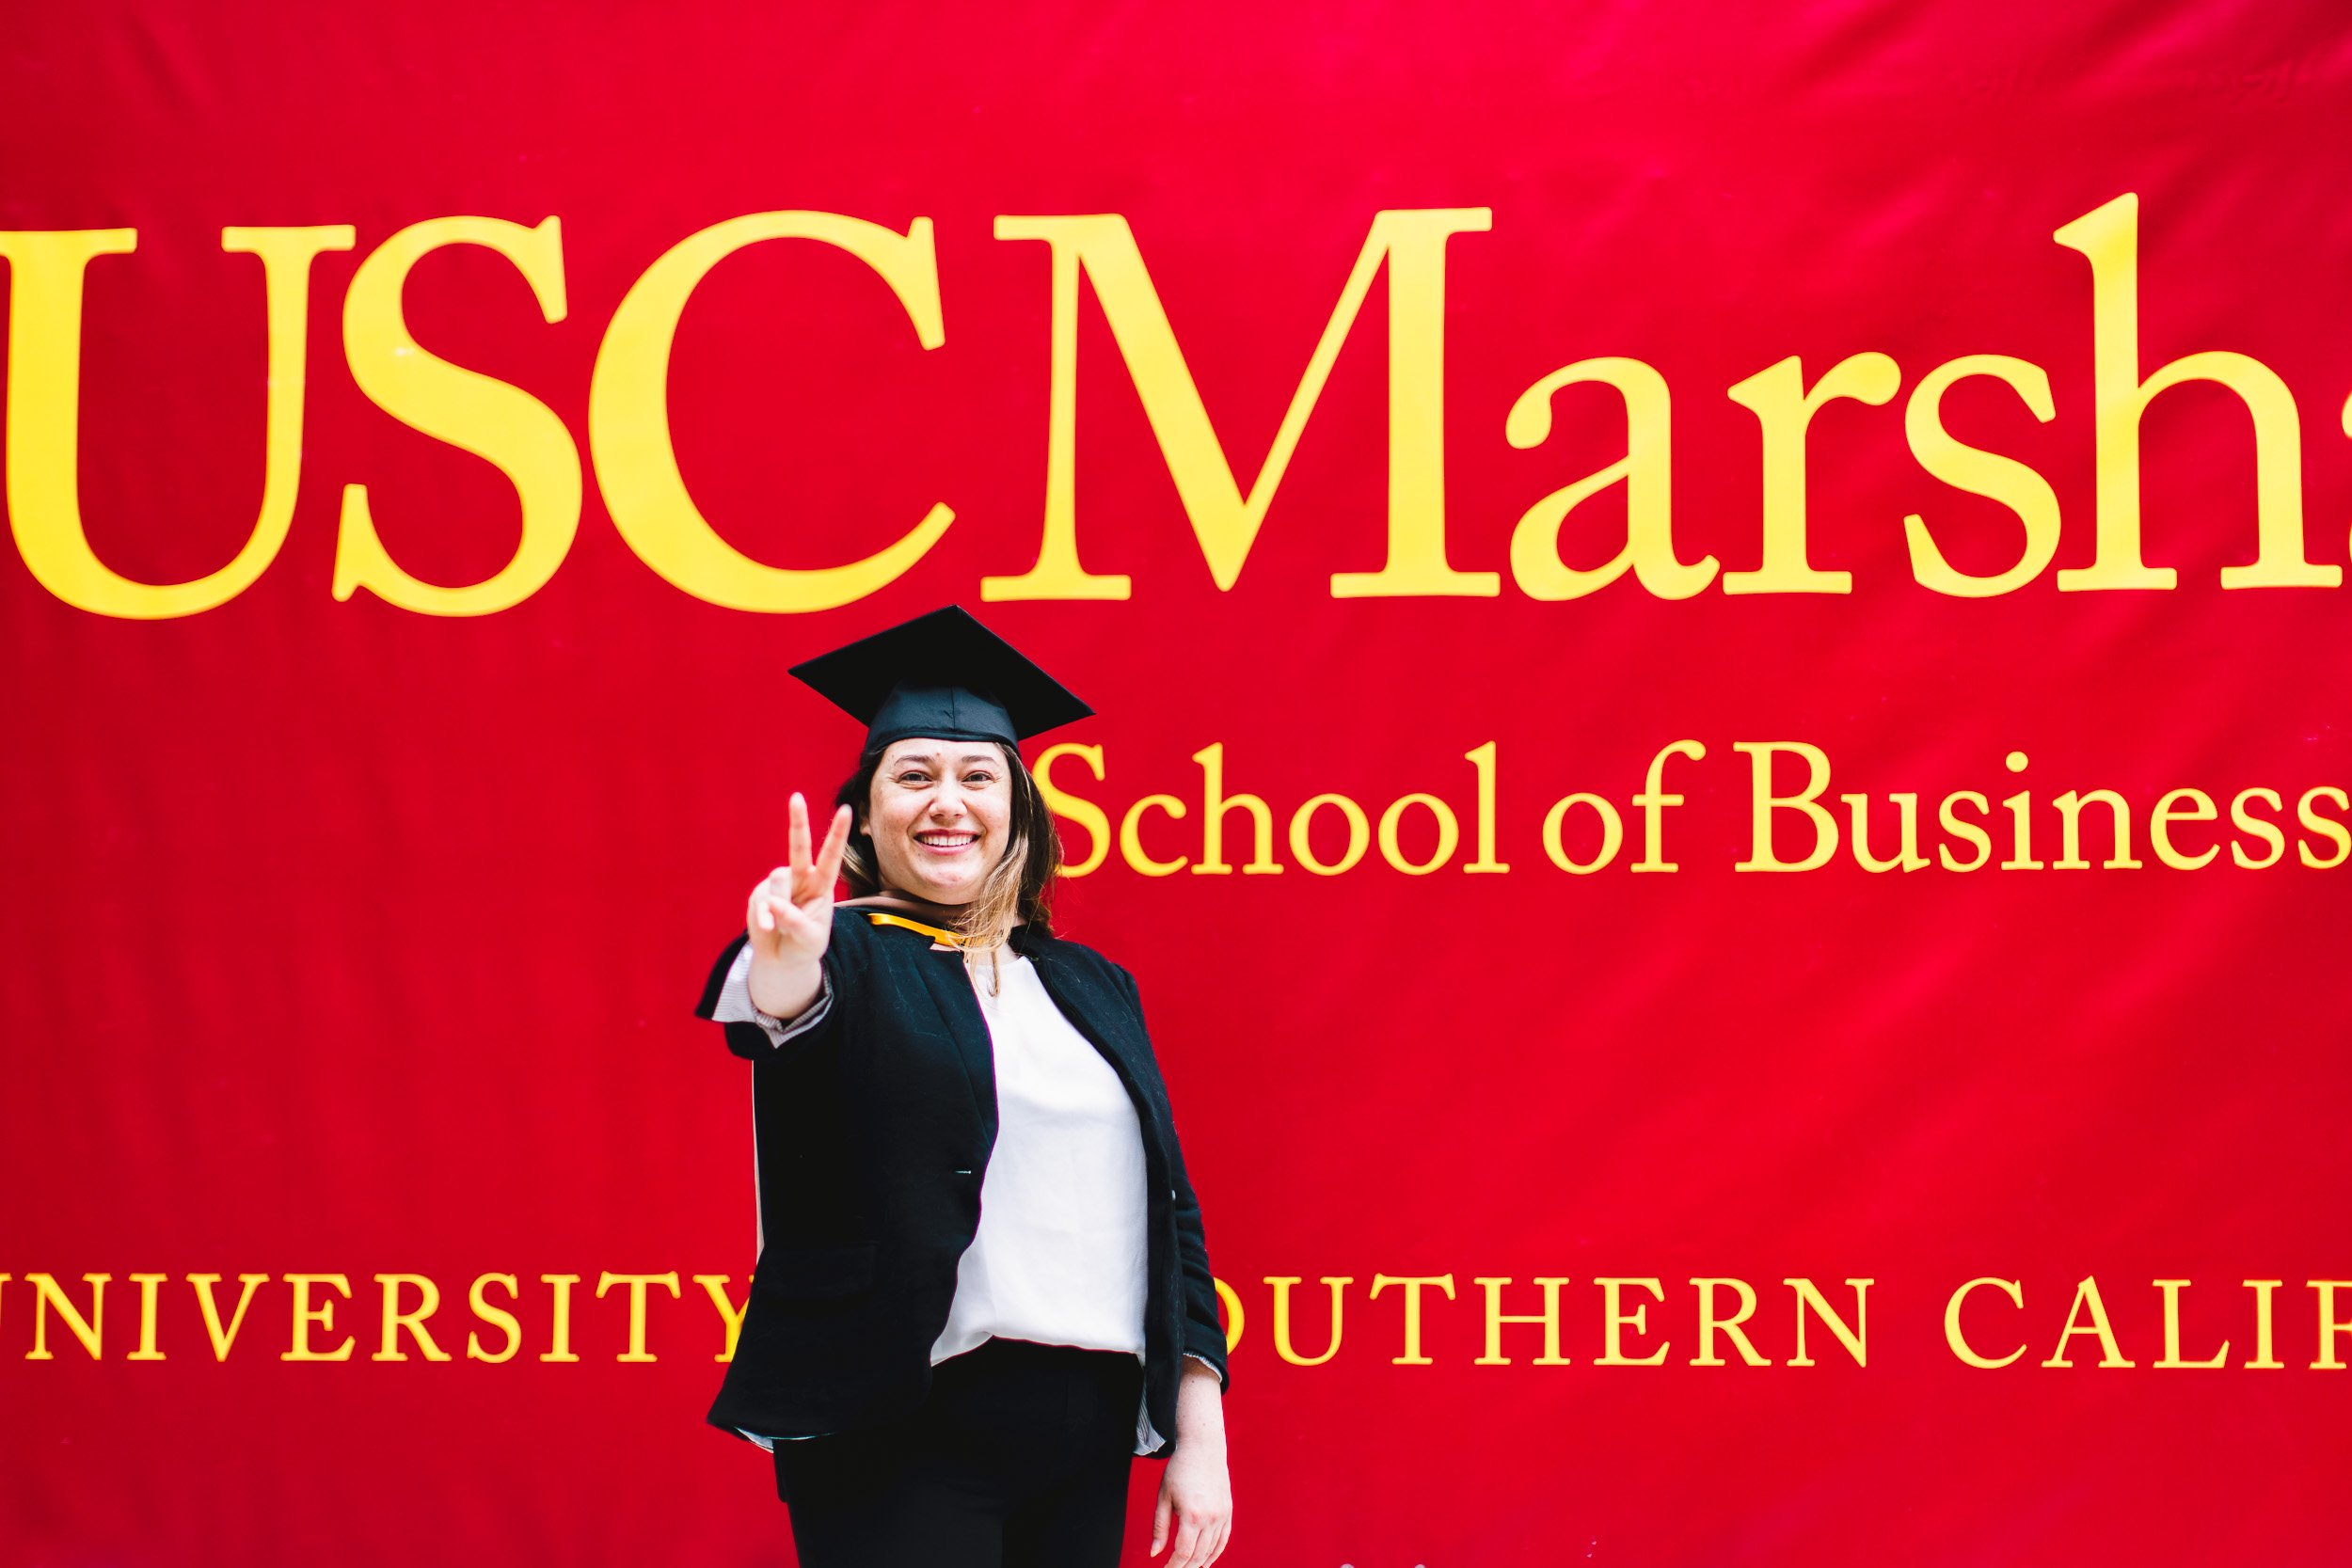 USC Marshall Graduation Portraits of graduate in front of large School of Business banner. Los Angeles, CA